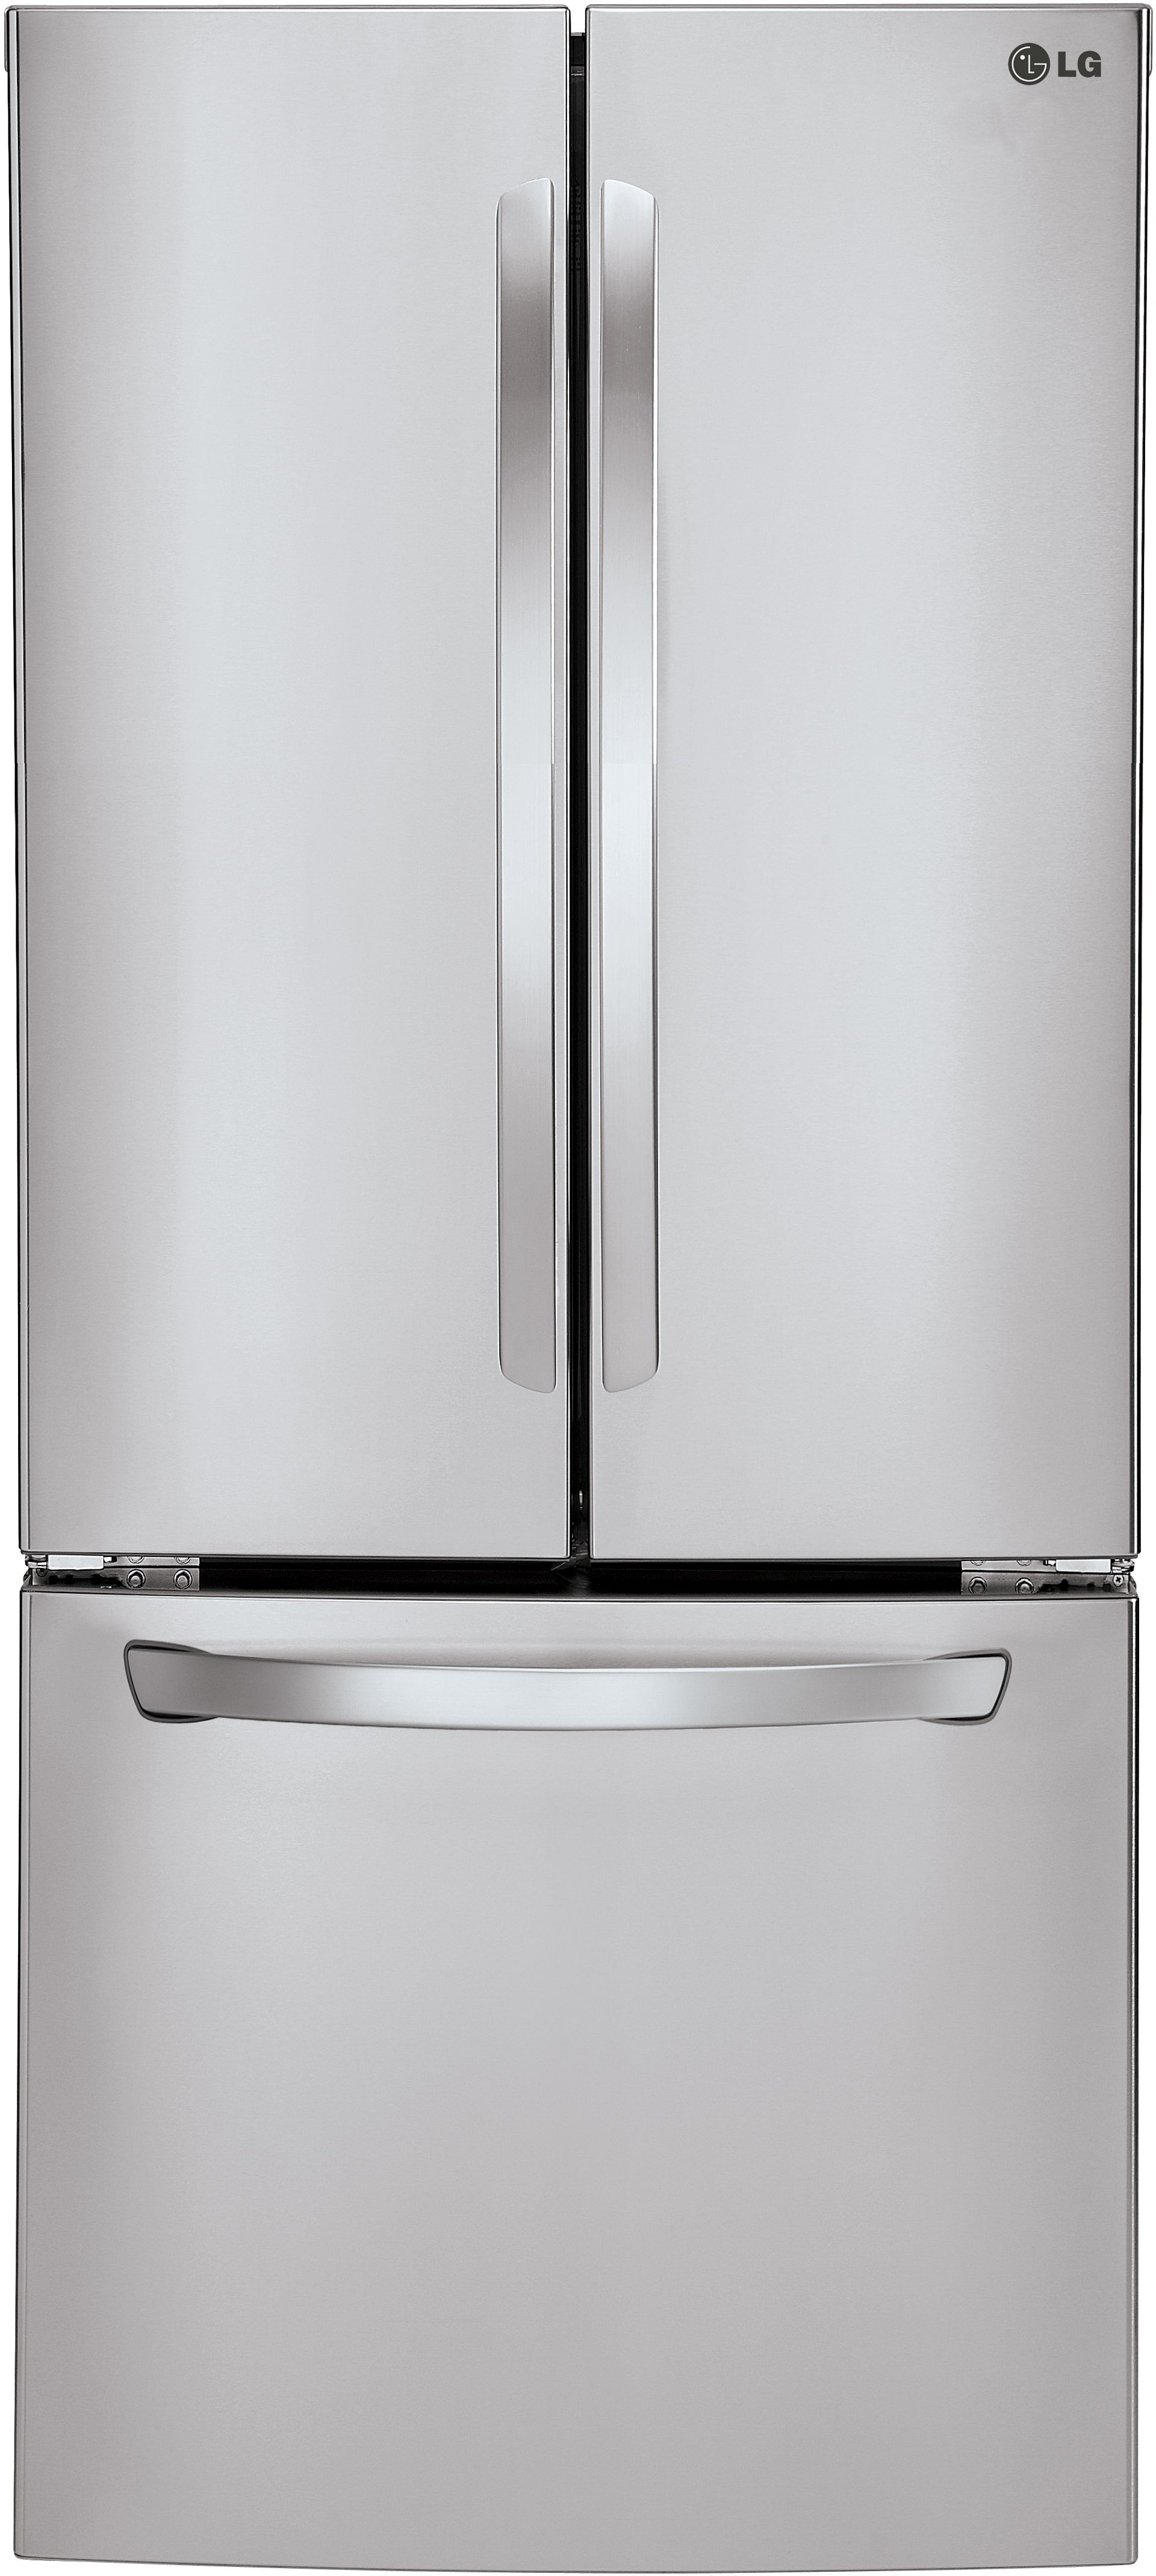 LG 21.8 Cu. Ft. Stainless Steel French Door Refrigerator-LFC22770ST